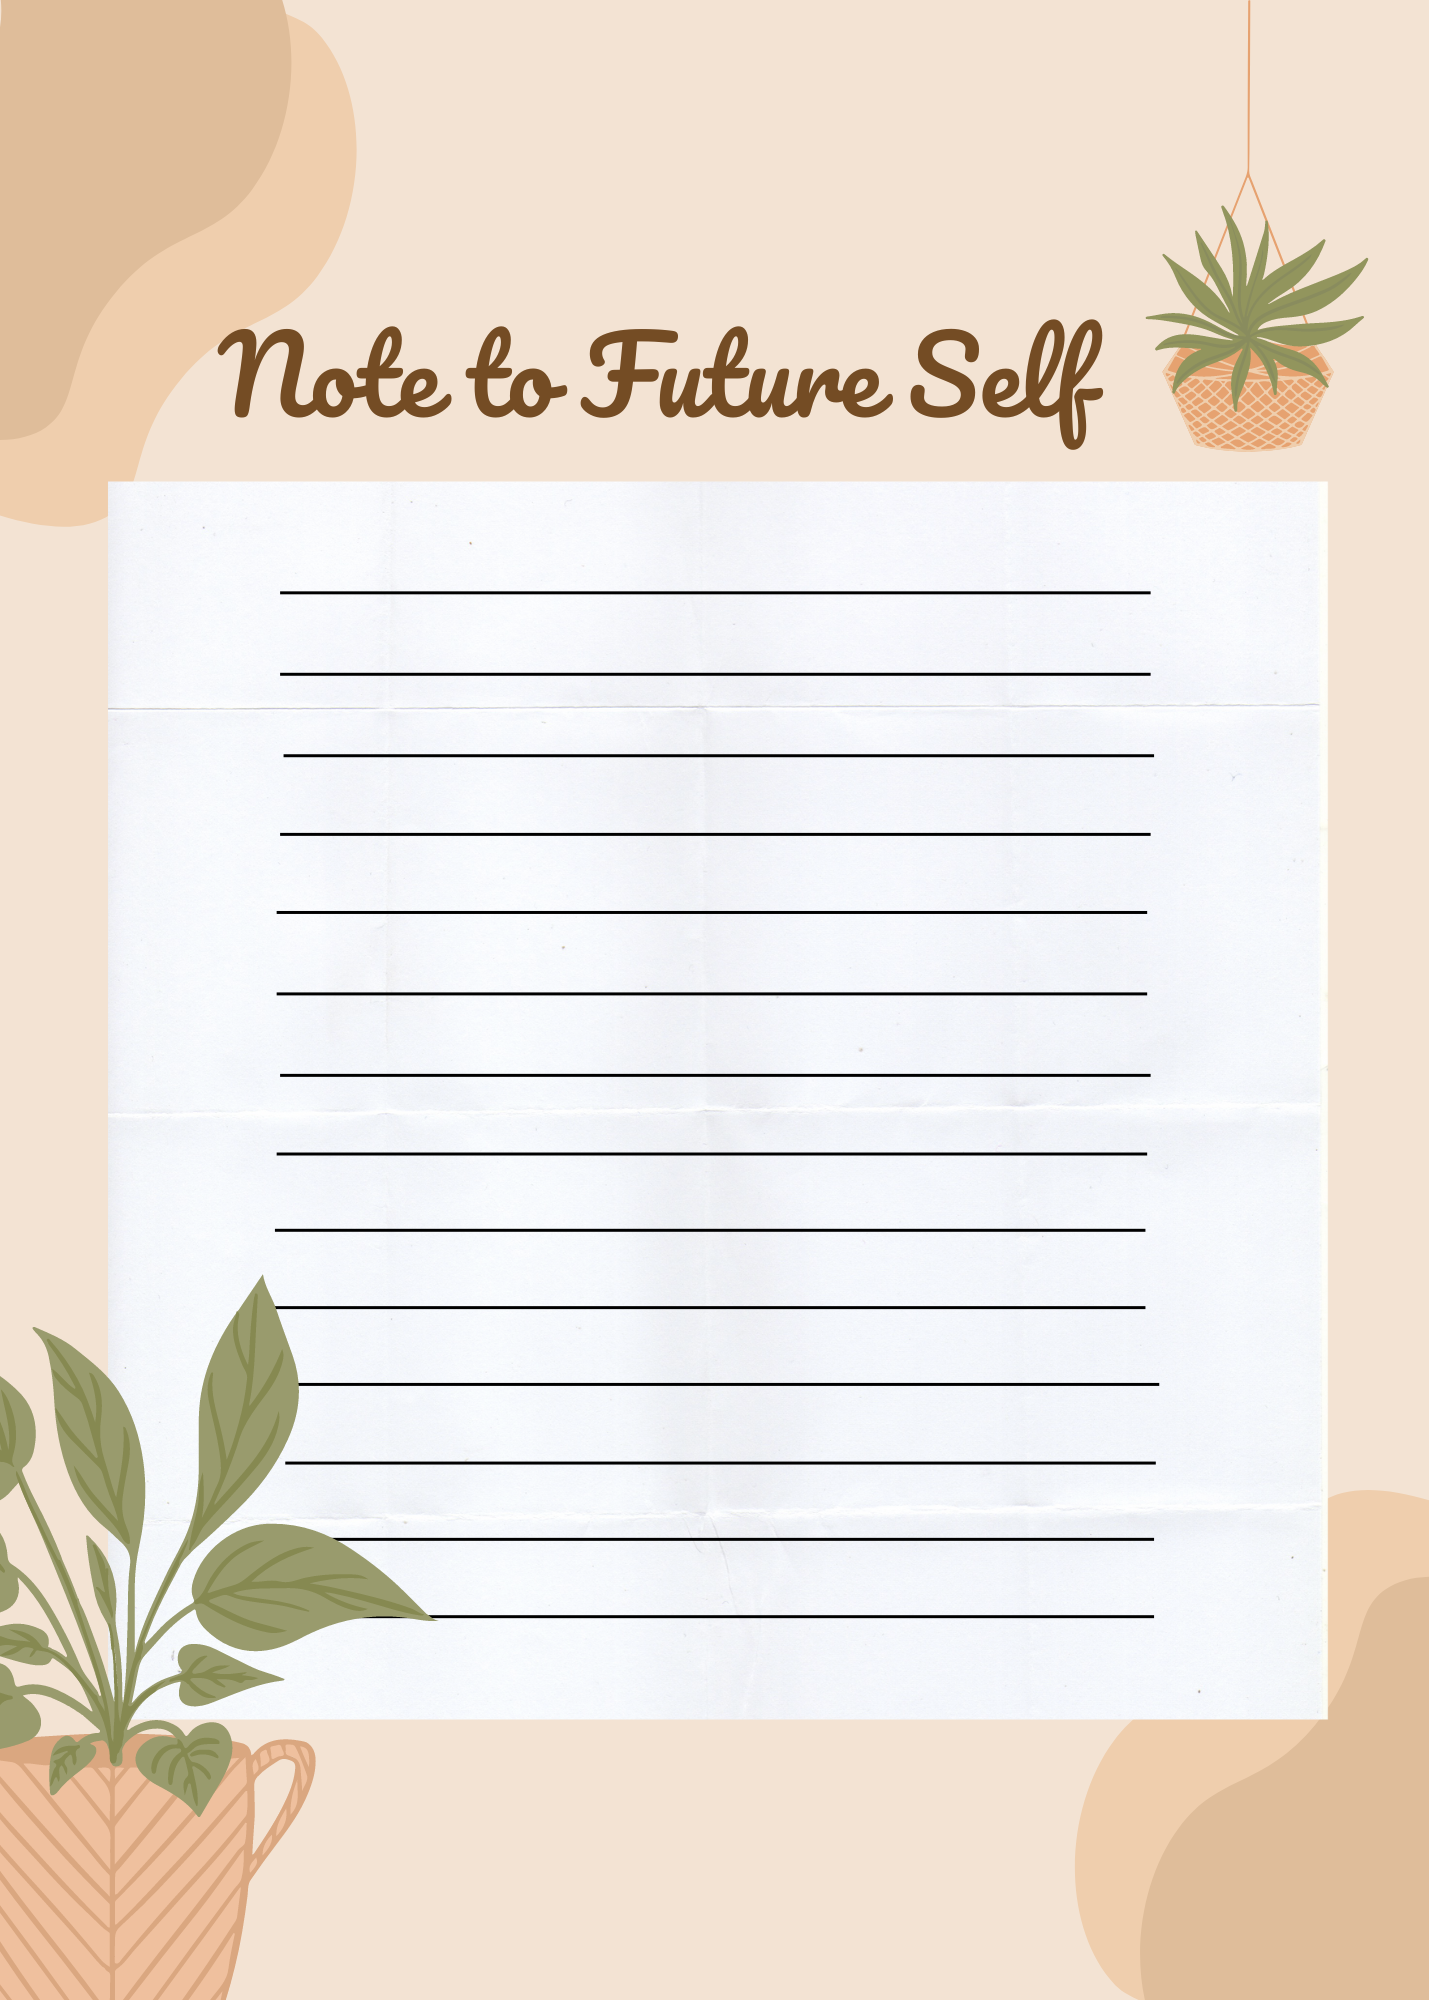 Notes to Future Self